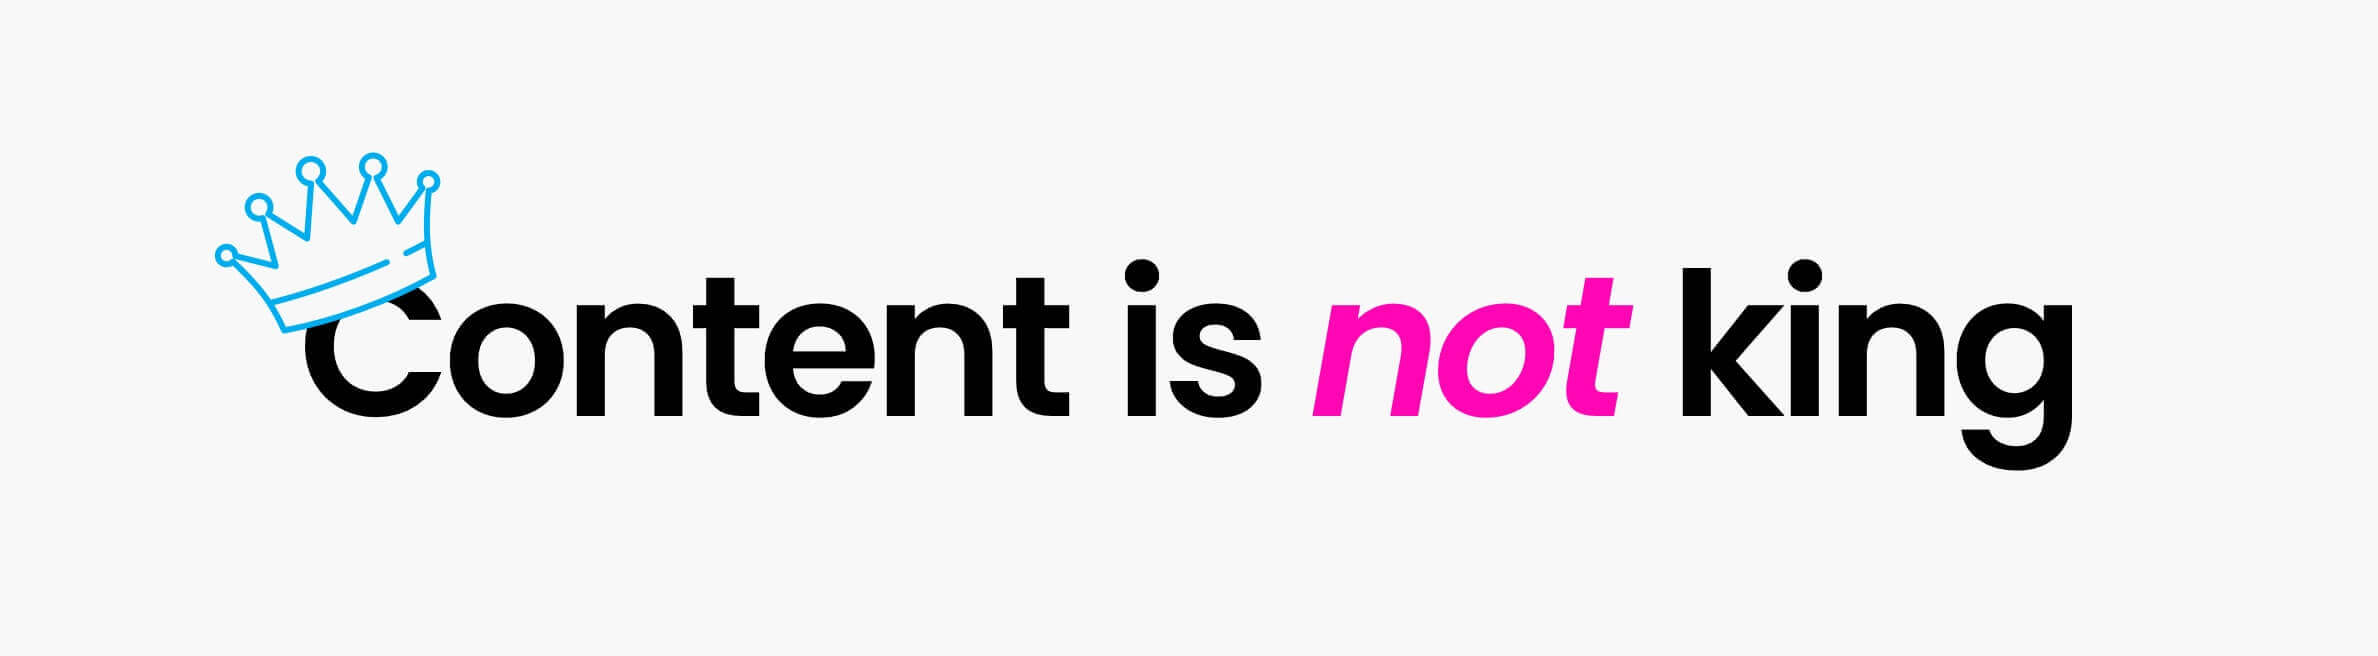 Content is not king.